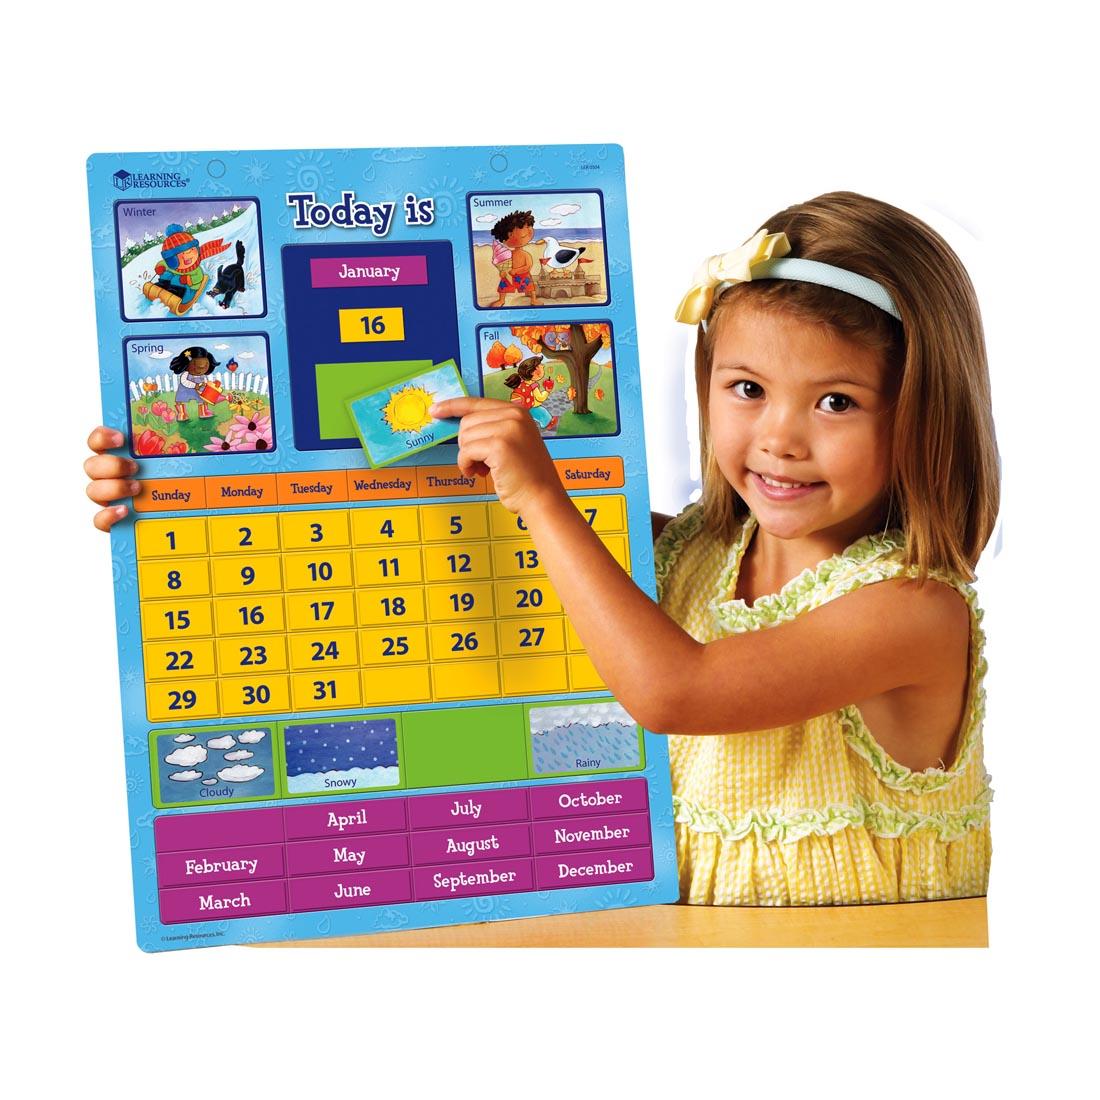 child holding a Magnetic Learning Calendar with spots for seasons, weather, months and days